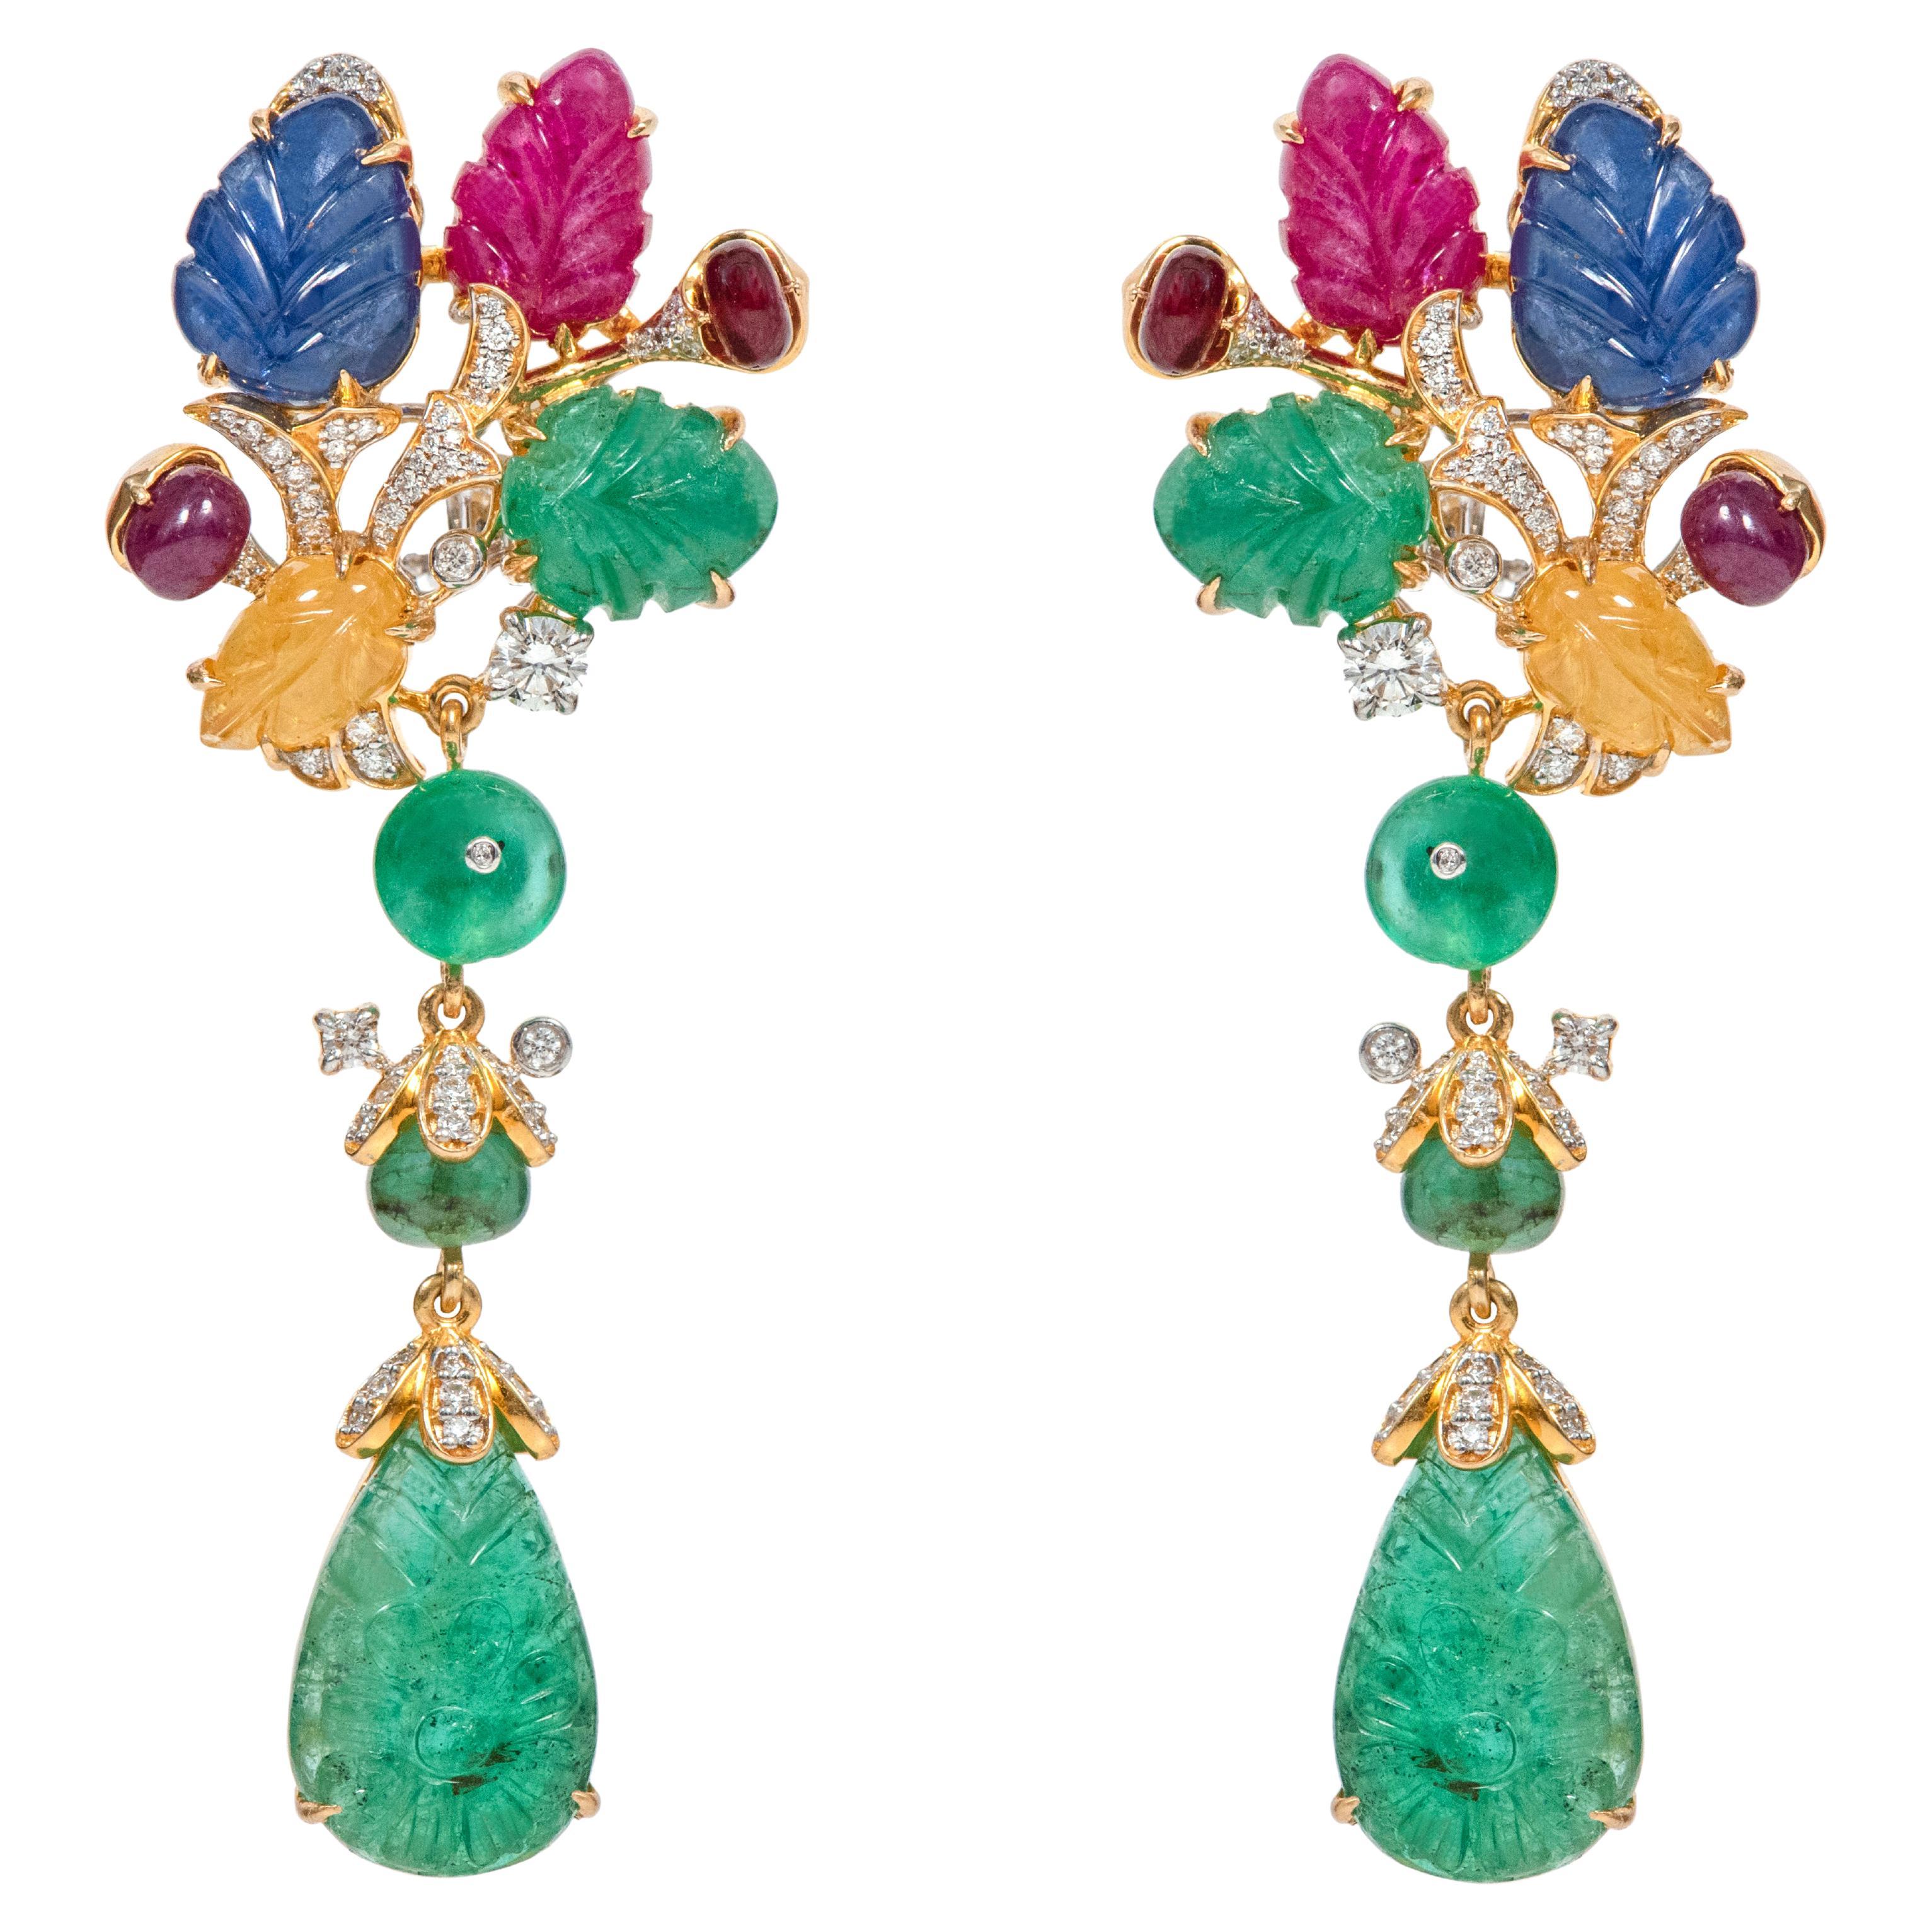 18 Karat Gold 43.67 Carat Diamond and Carved Ruby, Sapphire, and Emerald Earring